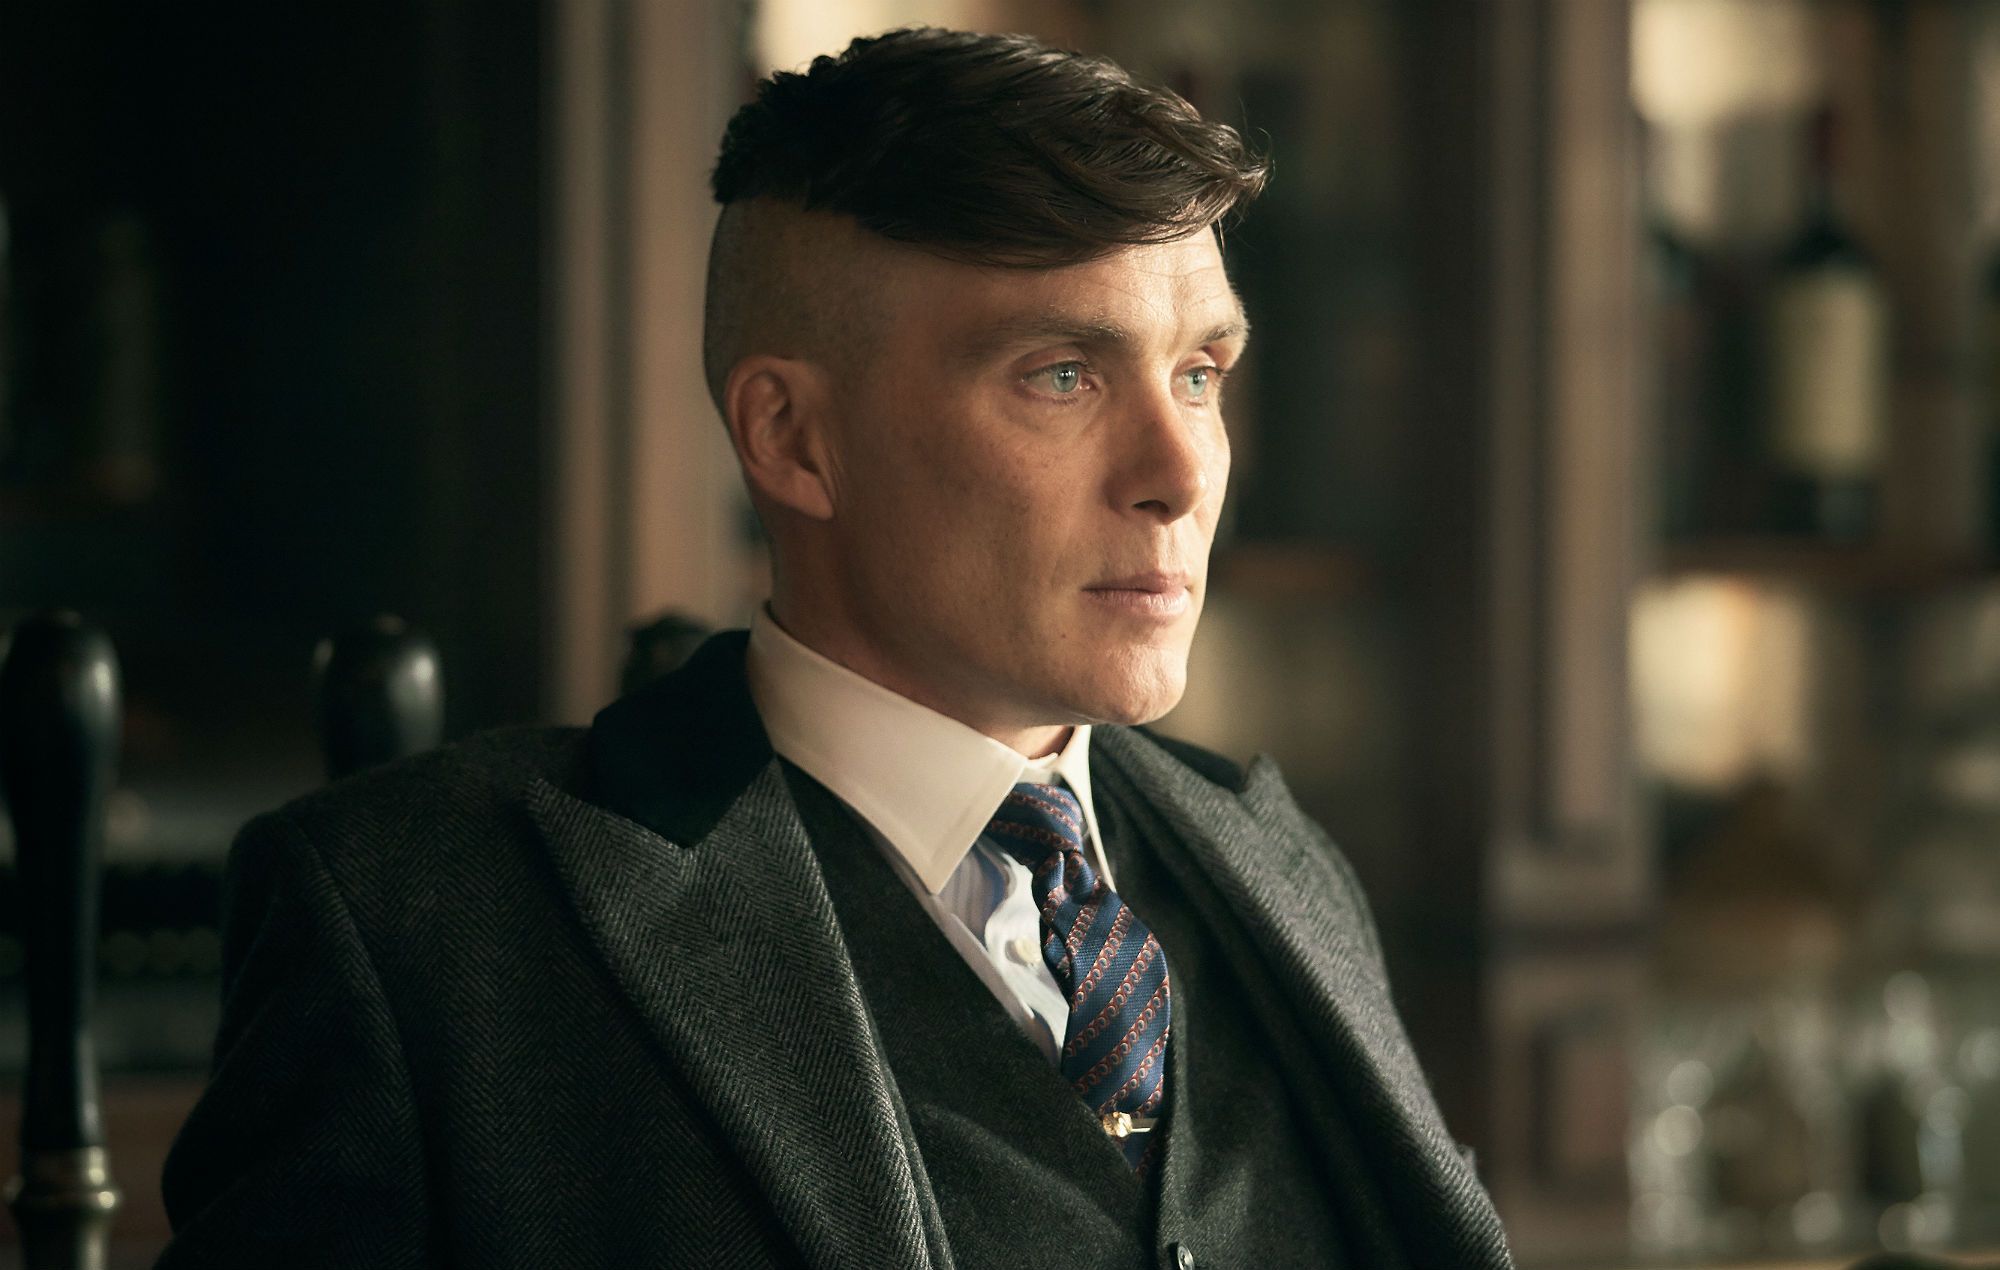 Peaky Blinders' season 5 episode 2 review: Paranoia sets in as Tommy treads literal and figurative minefields